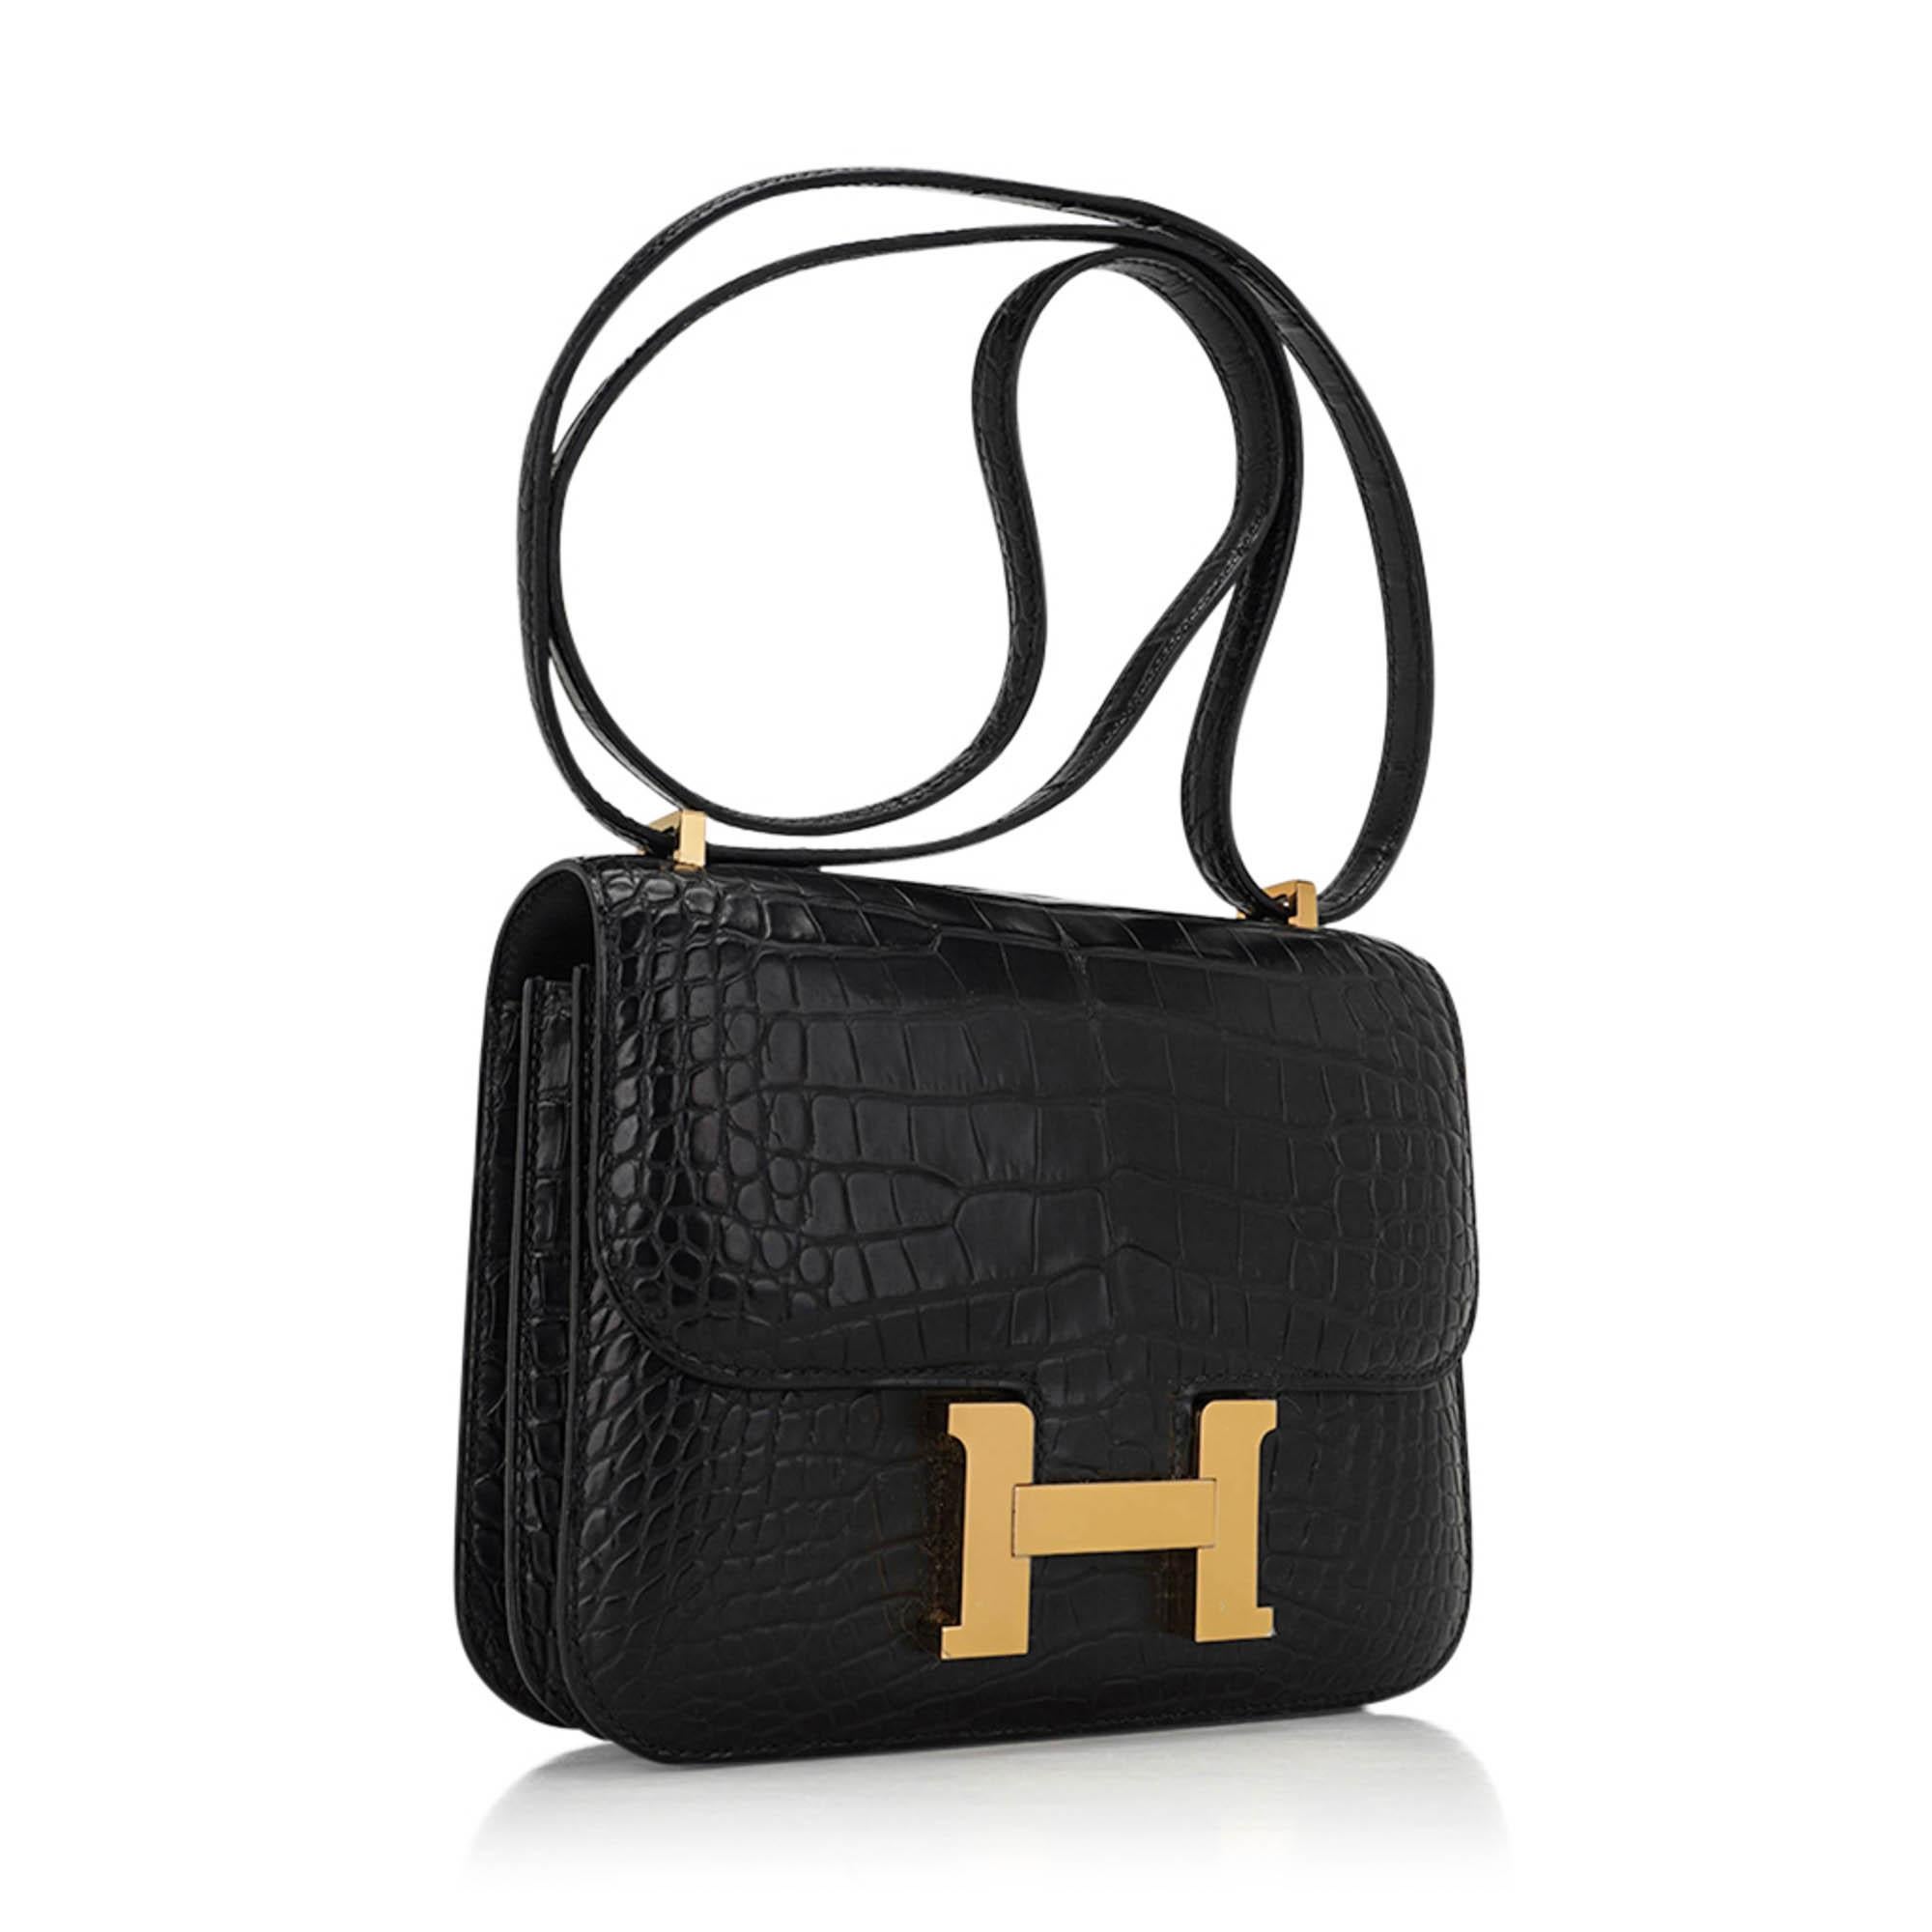 Mightychic offers an Hermes 18 Constance bag featured in Black Matte Alligator.
Removeable mirror with alligator tab. 
Rich with Gold hardware.
The effect is understated chic.
Hermes Paris Made in France is stamped on front under flap.
Comes with